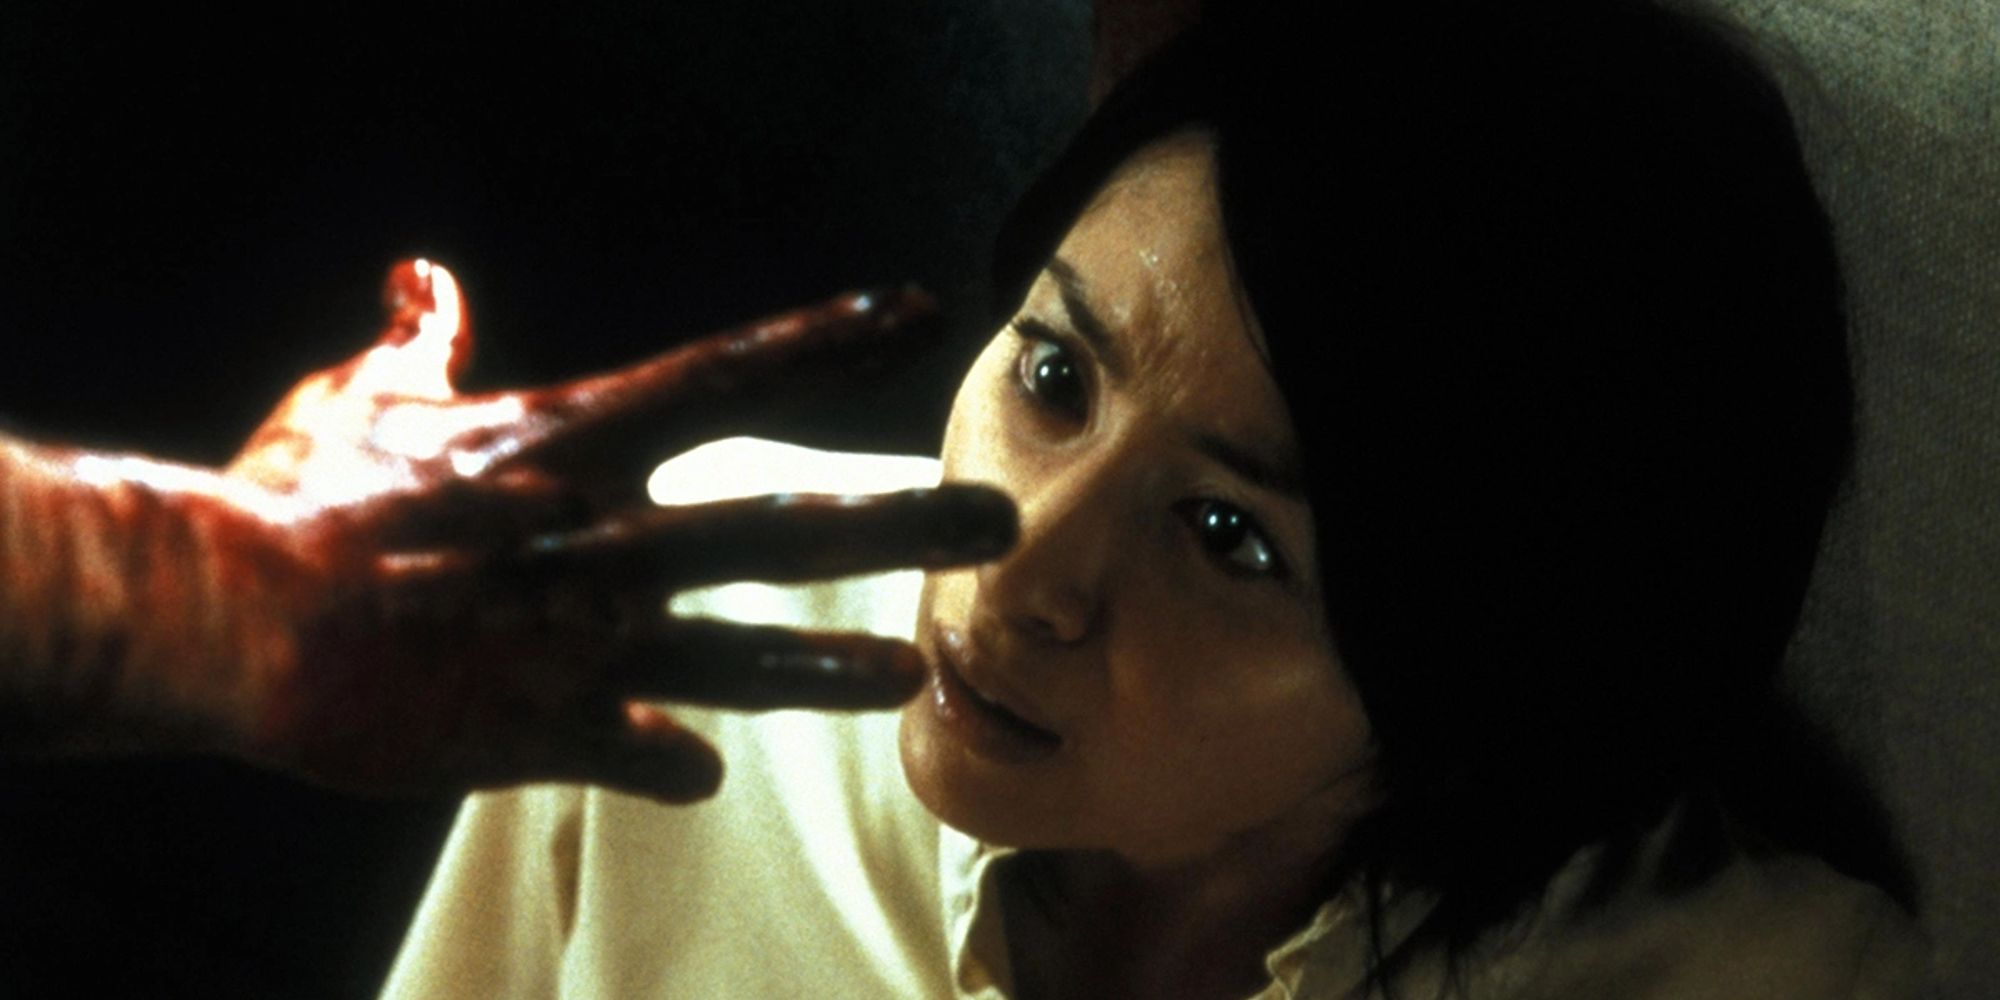 A terrified woman recoils as a bloodied hand reaches towards her face.